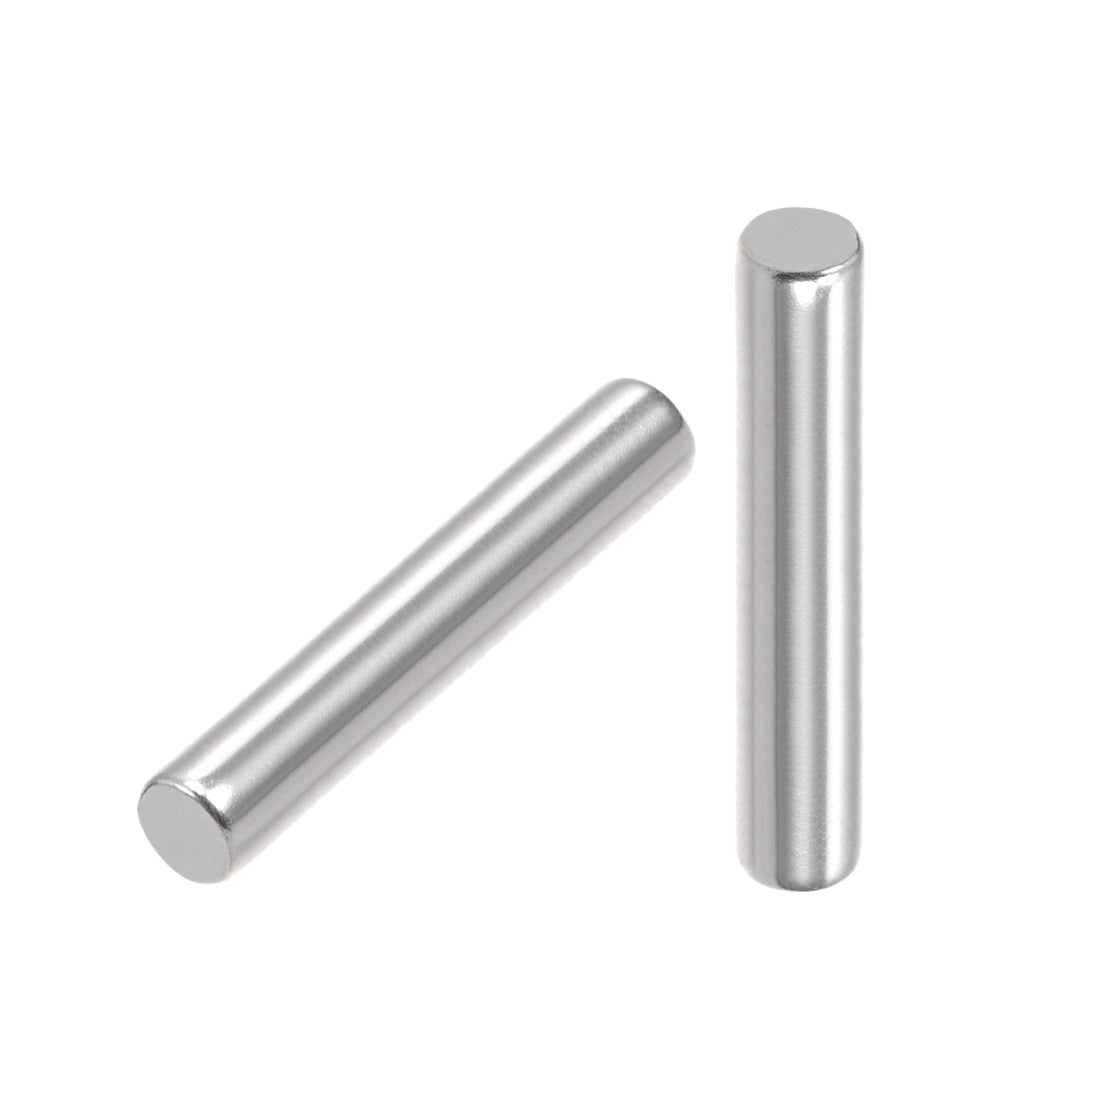 uxcell Uxcell 100Pcs Dowel Pin 304 Stainless Steel Shelf Support Pin Fasten Elements Silver Tone